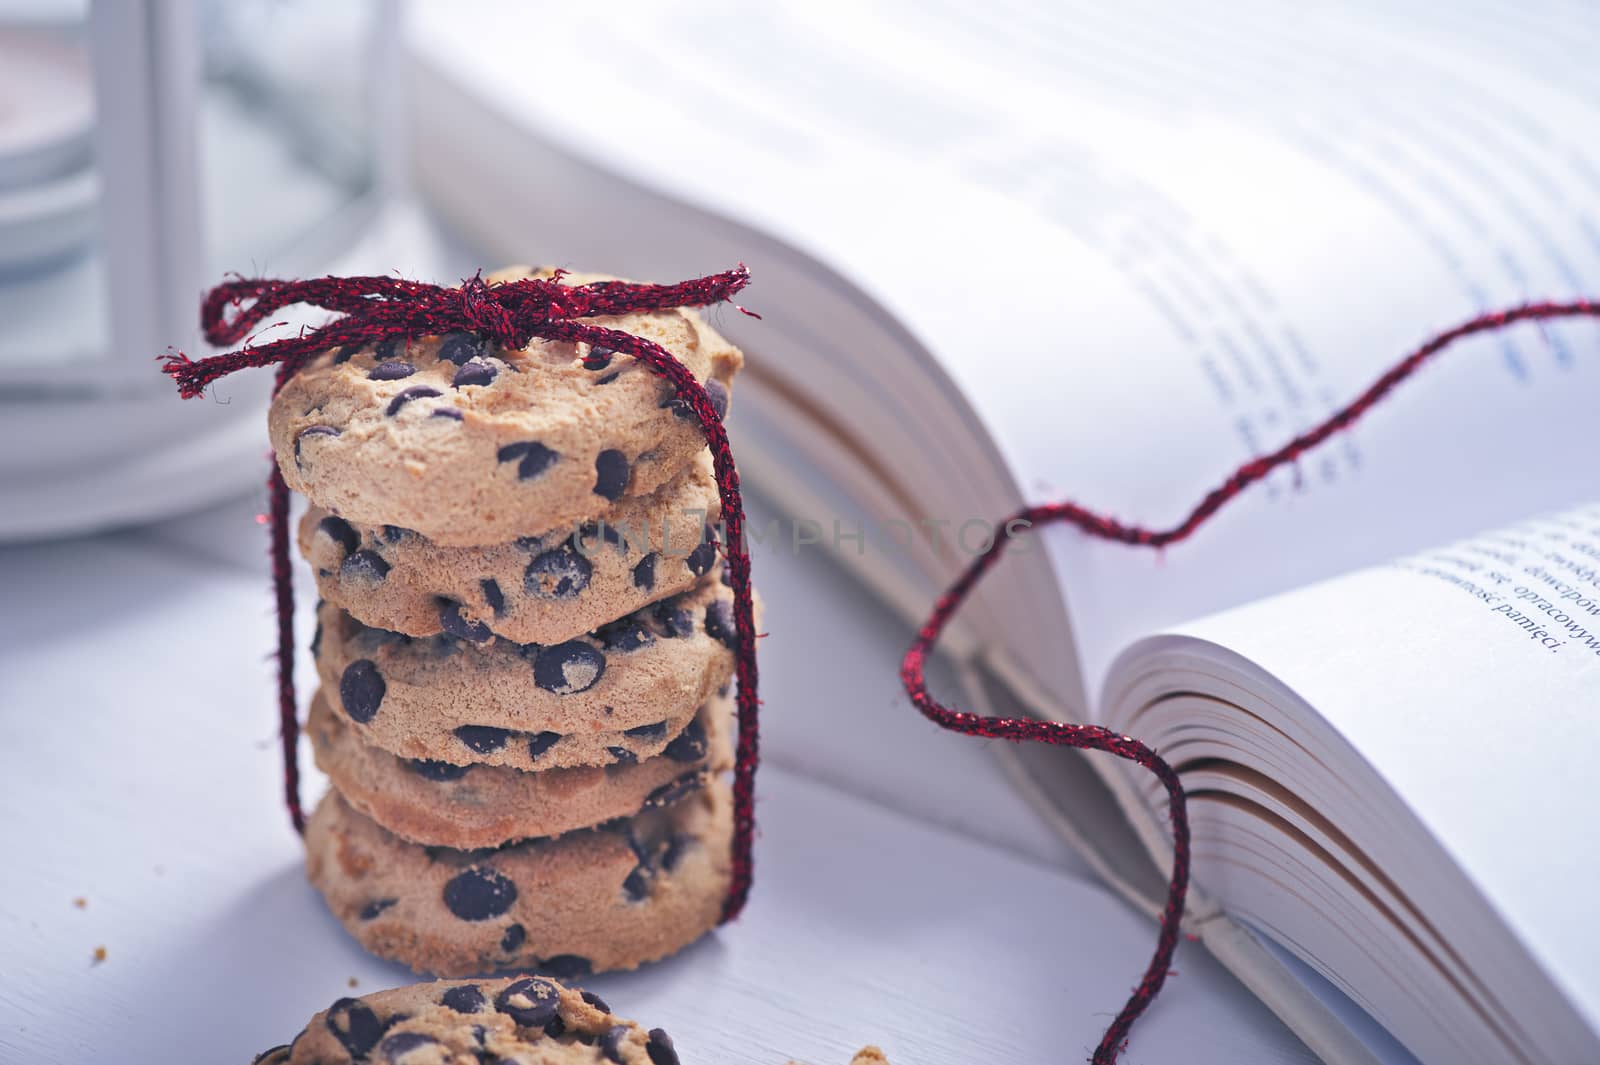 American cookies with chocolate next to the book on white table by Michalowski